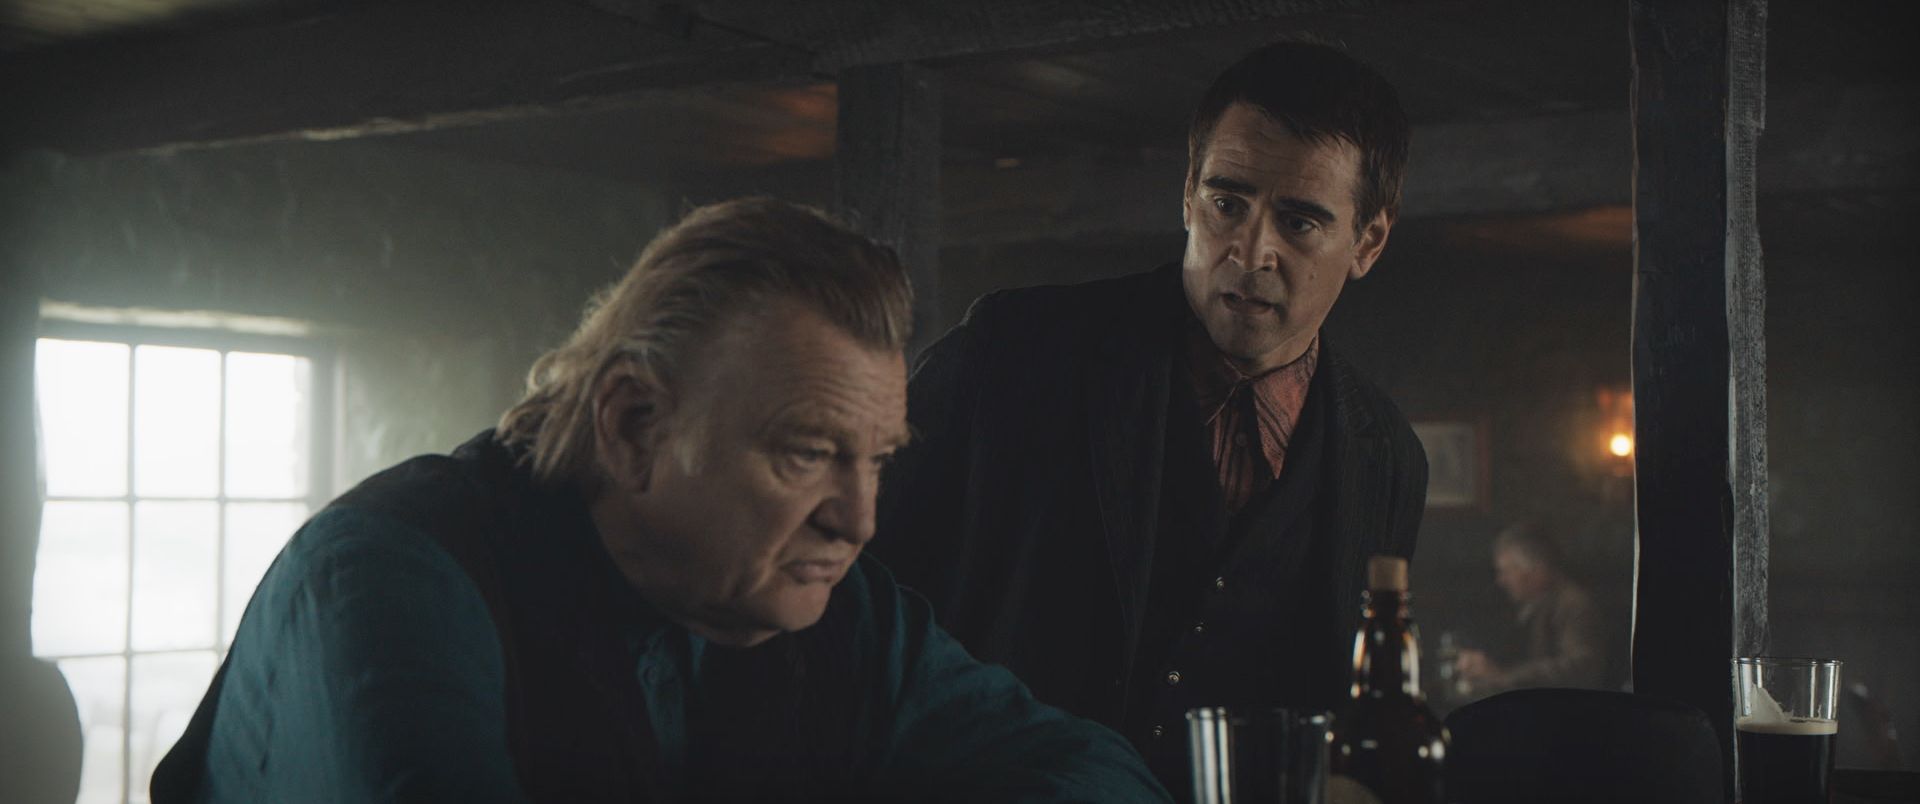 The Banshees of Inisherin colin farrell and Brendan Gleeson